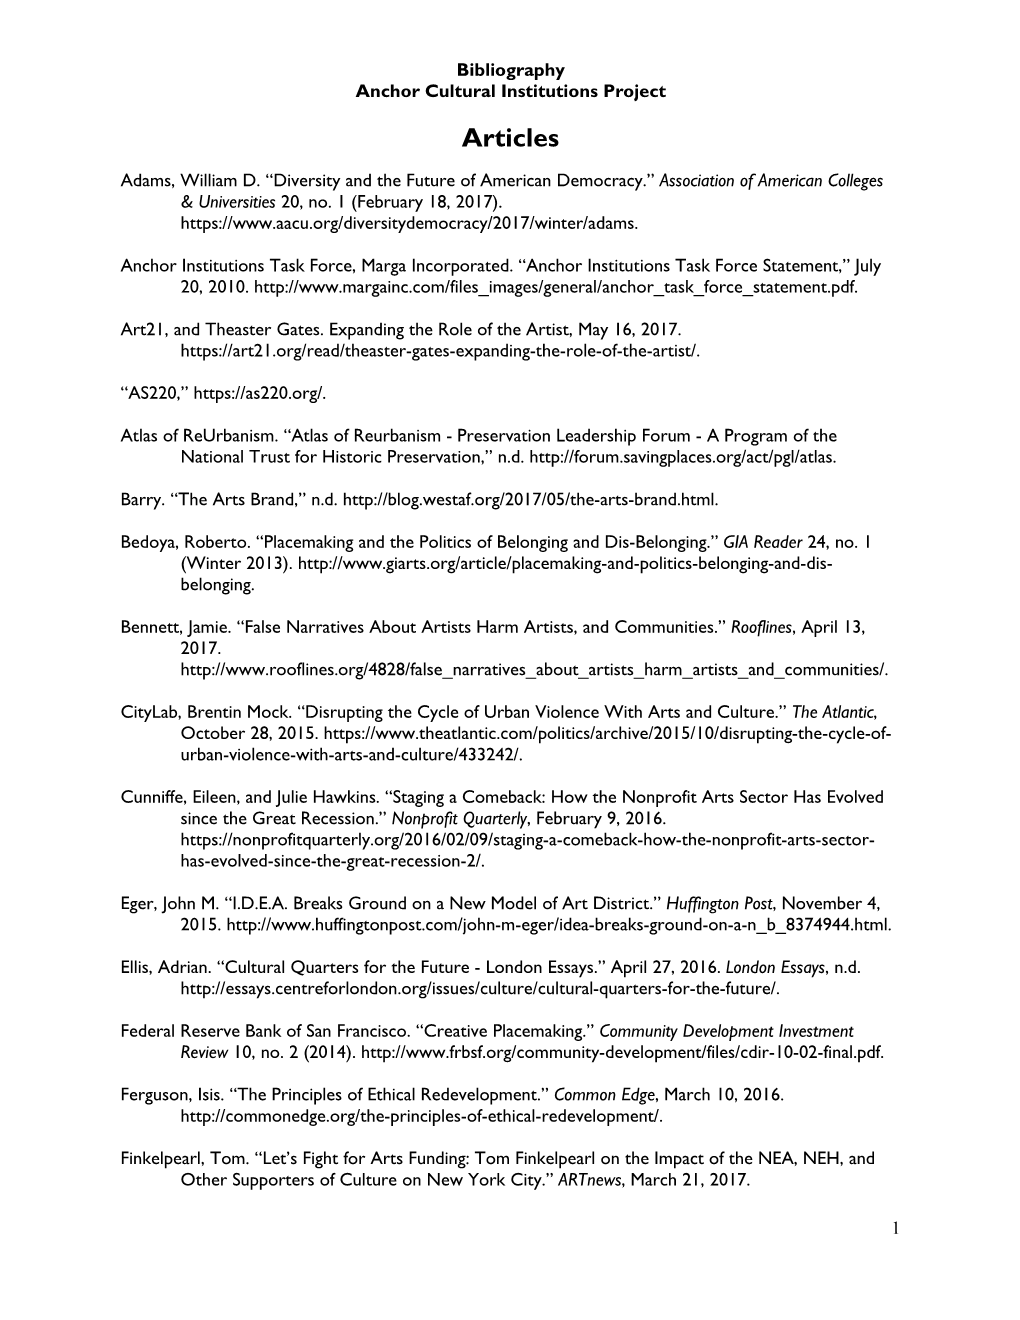 Bibliography of Anchor Cultural Institutions Project